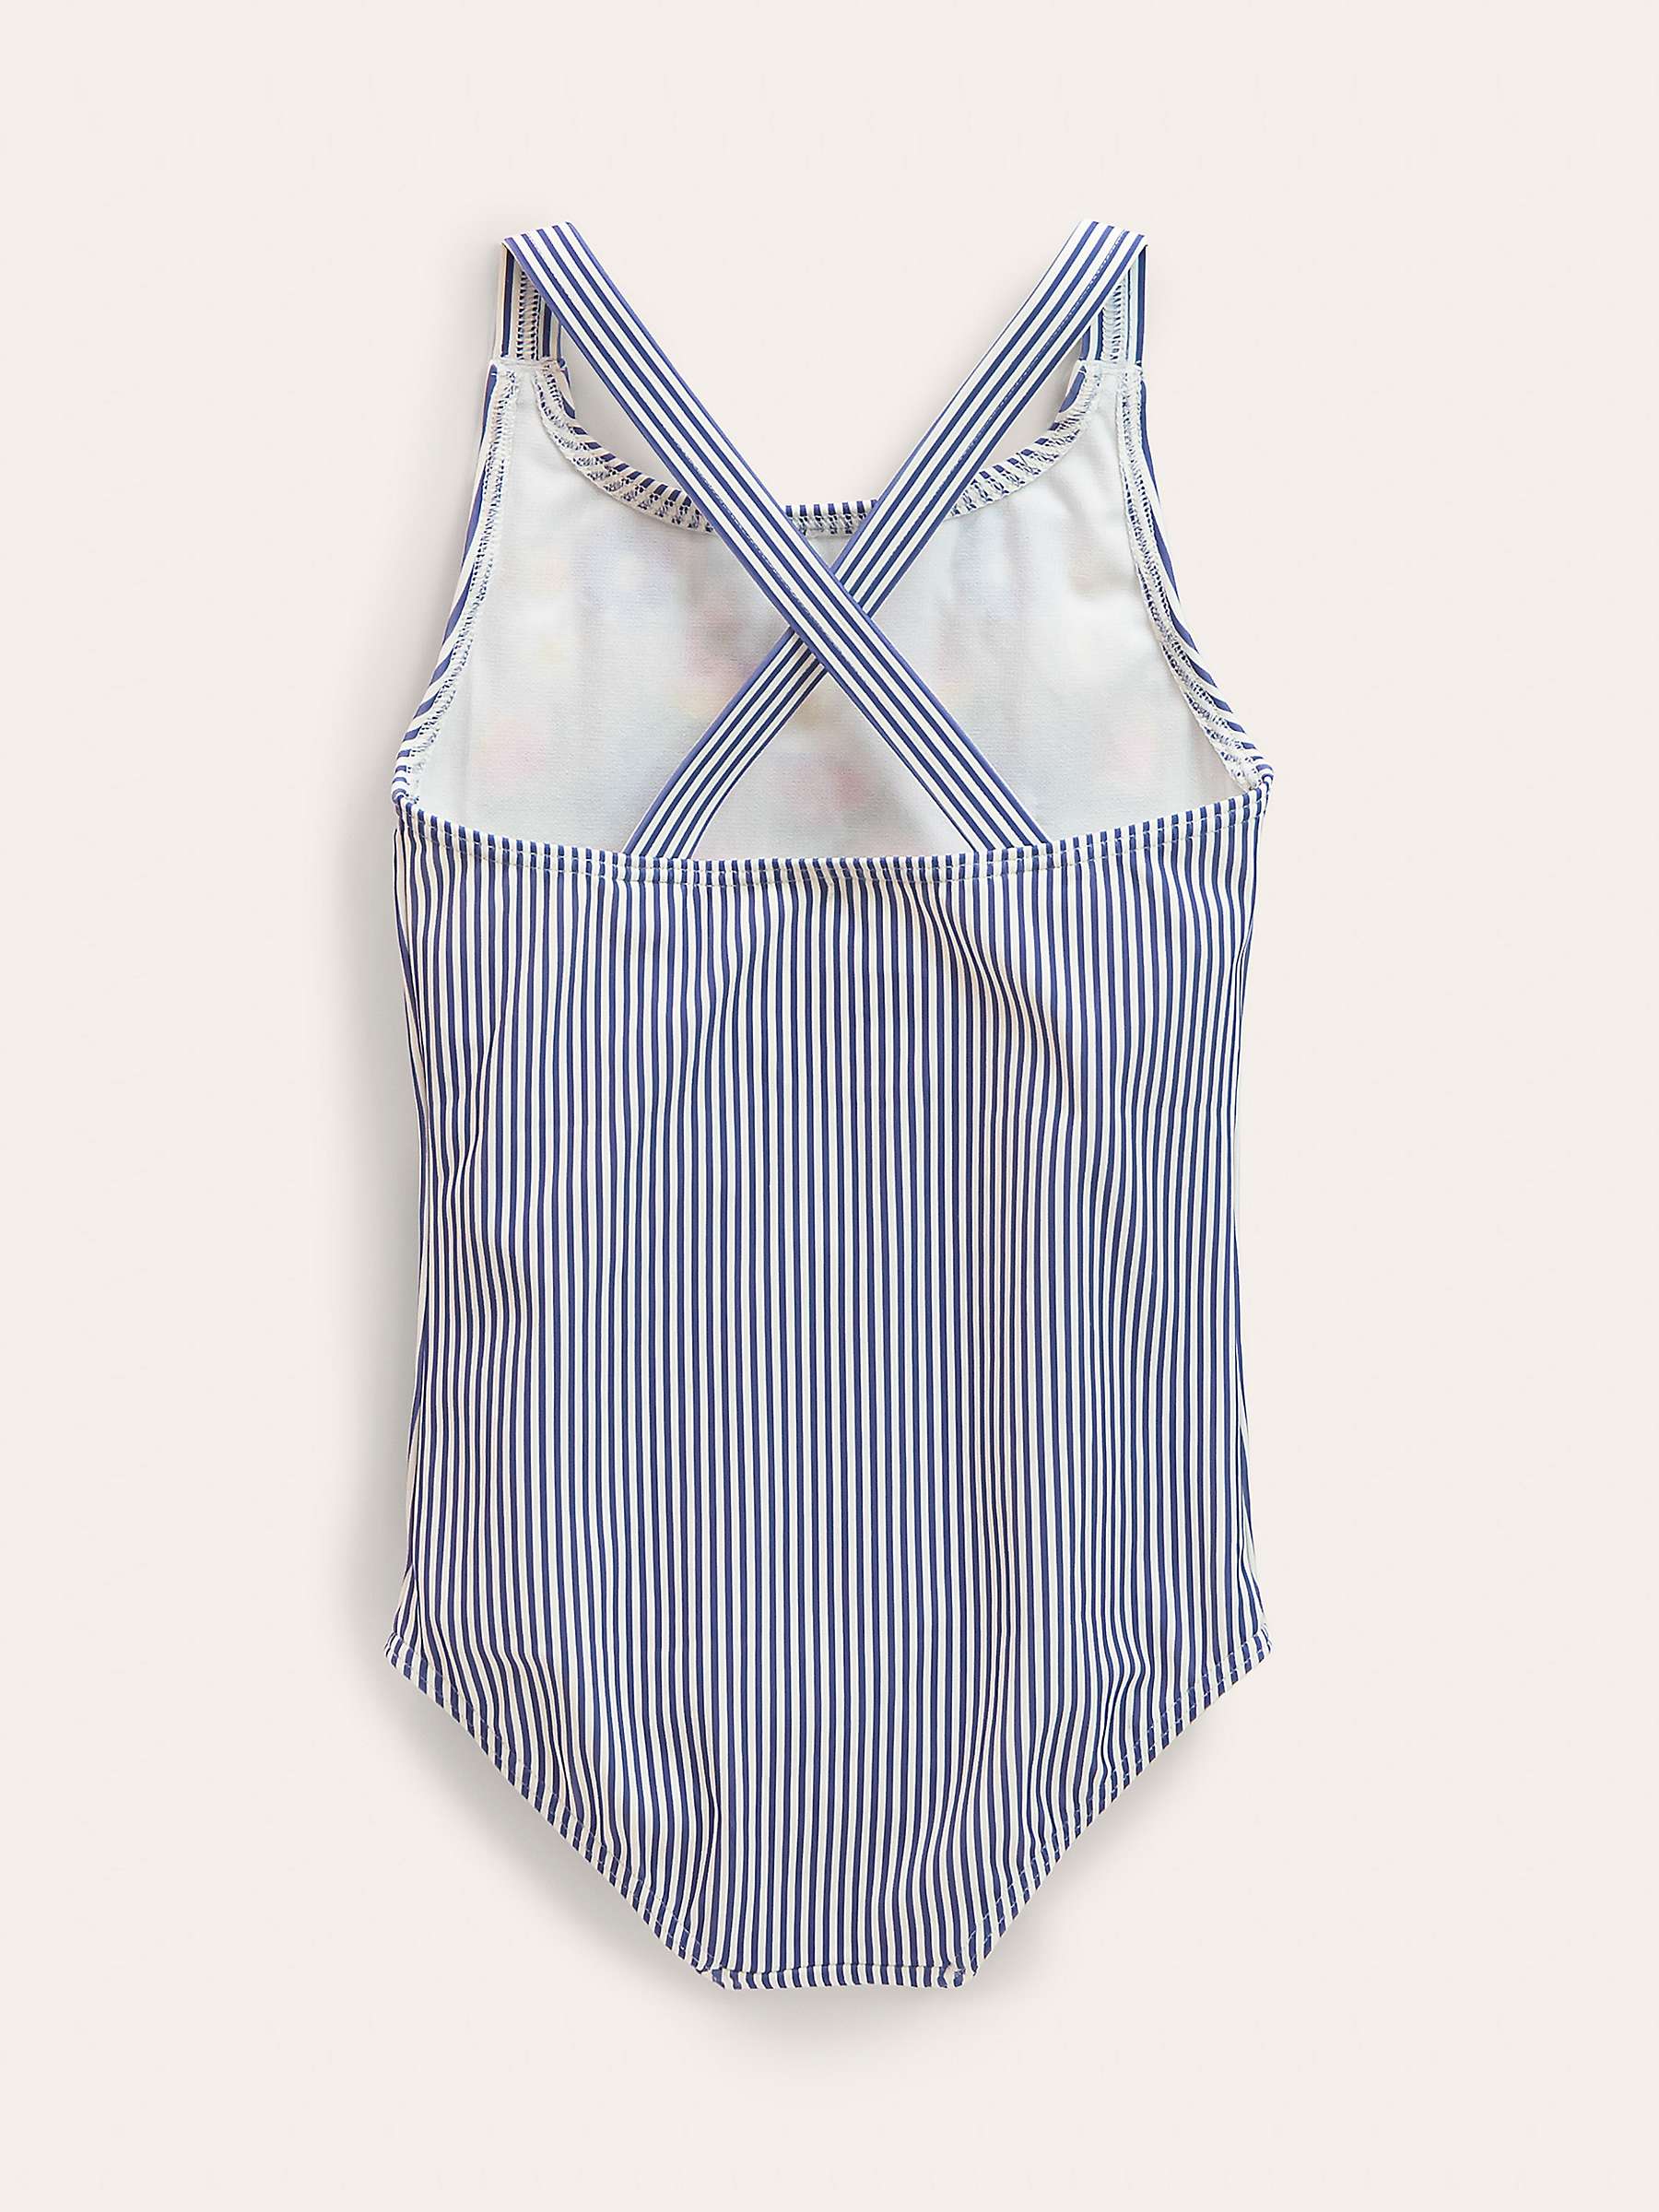 Buy Mini Boden Kids' Embroidered Swimsuit, Starboard/Multi Online at johnlewis.com